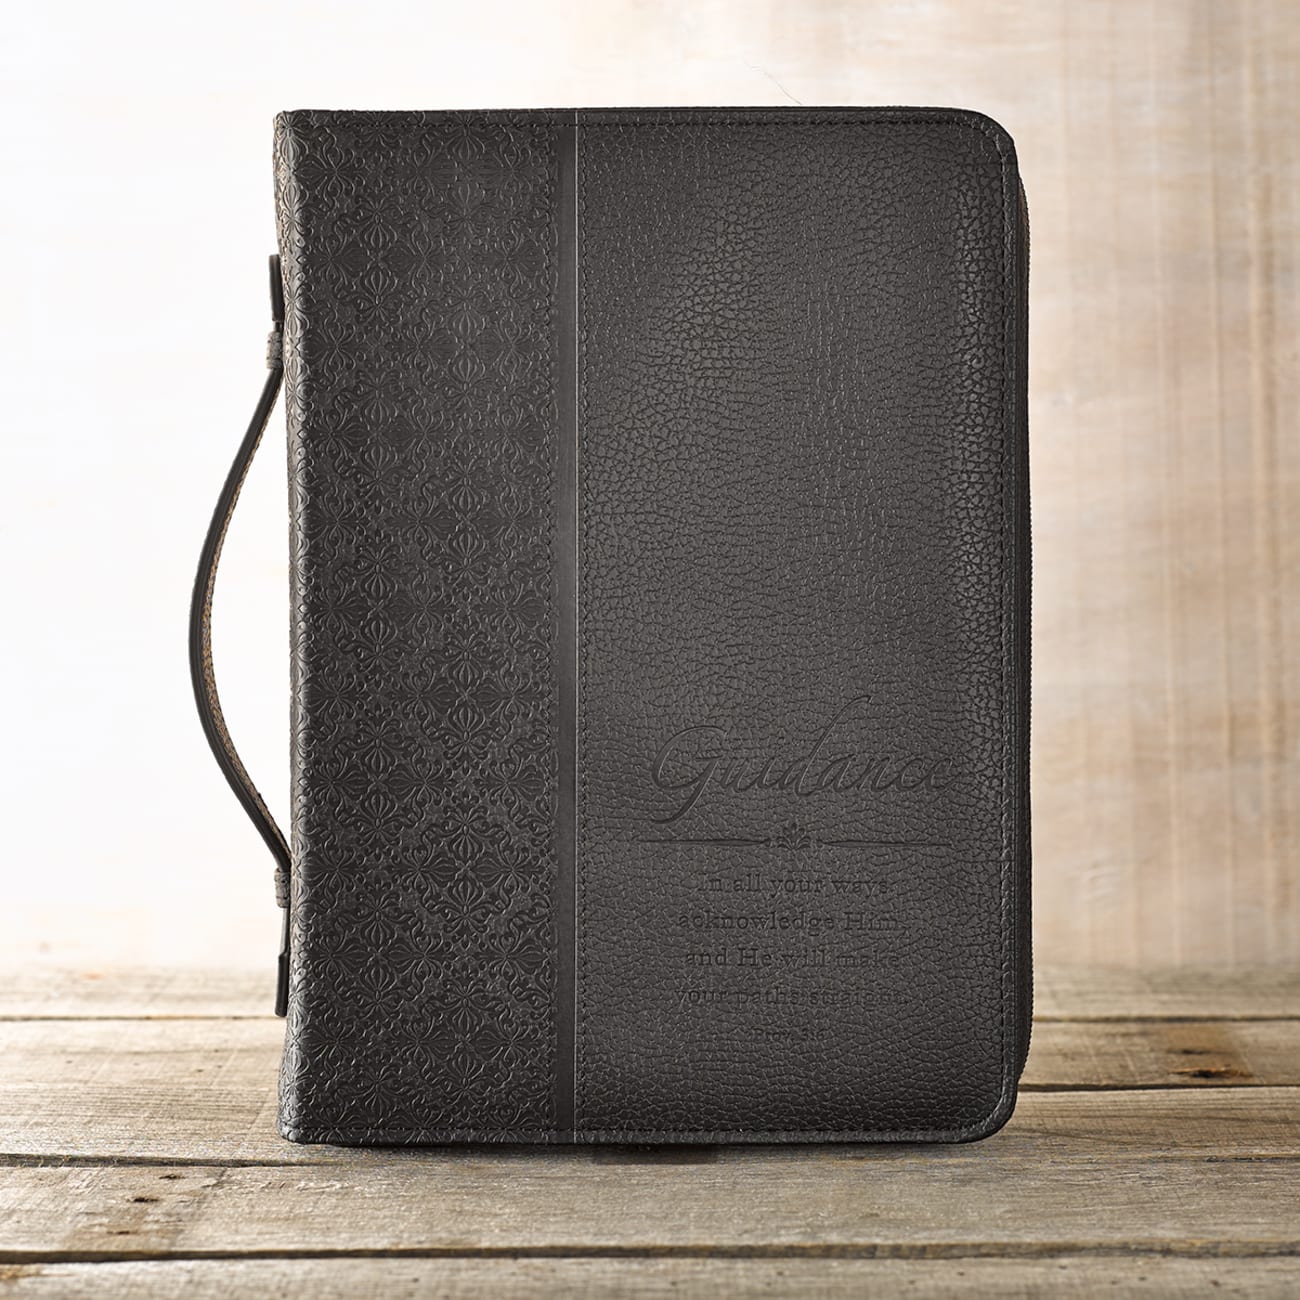 Bible Cover Classic Medium: Guidance Proverbs 3:6 Black Luxleather Bible Cover